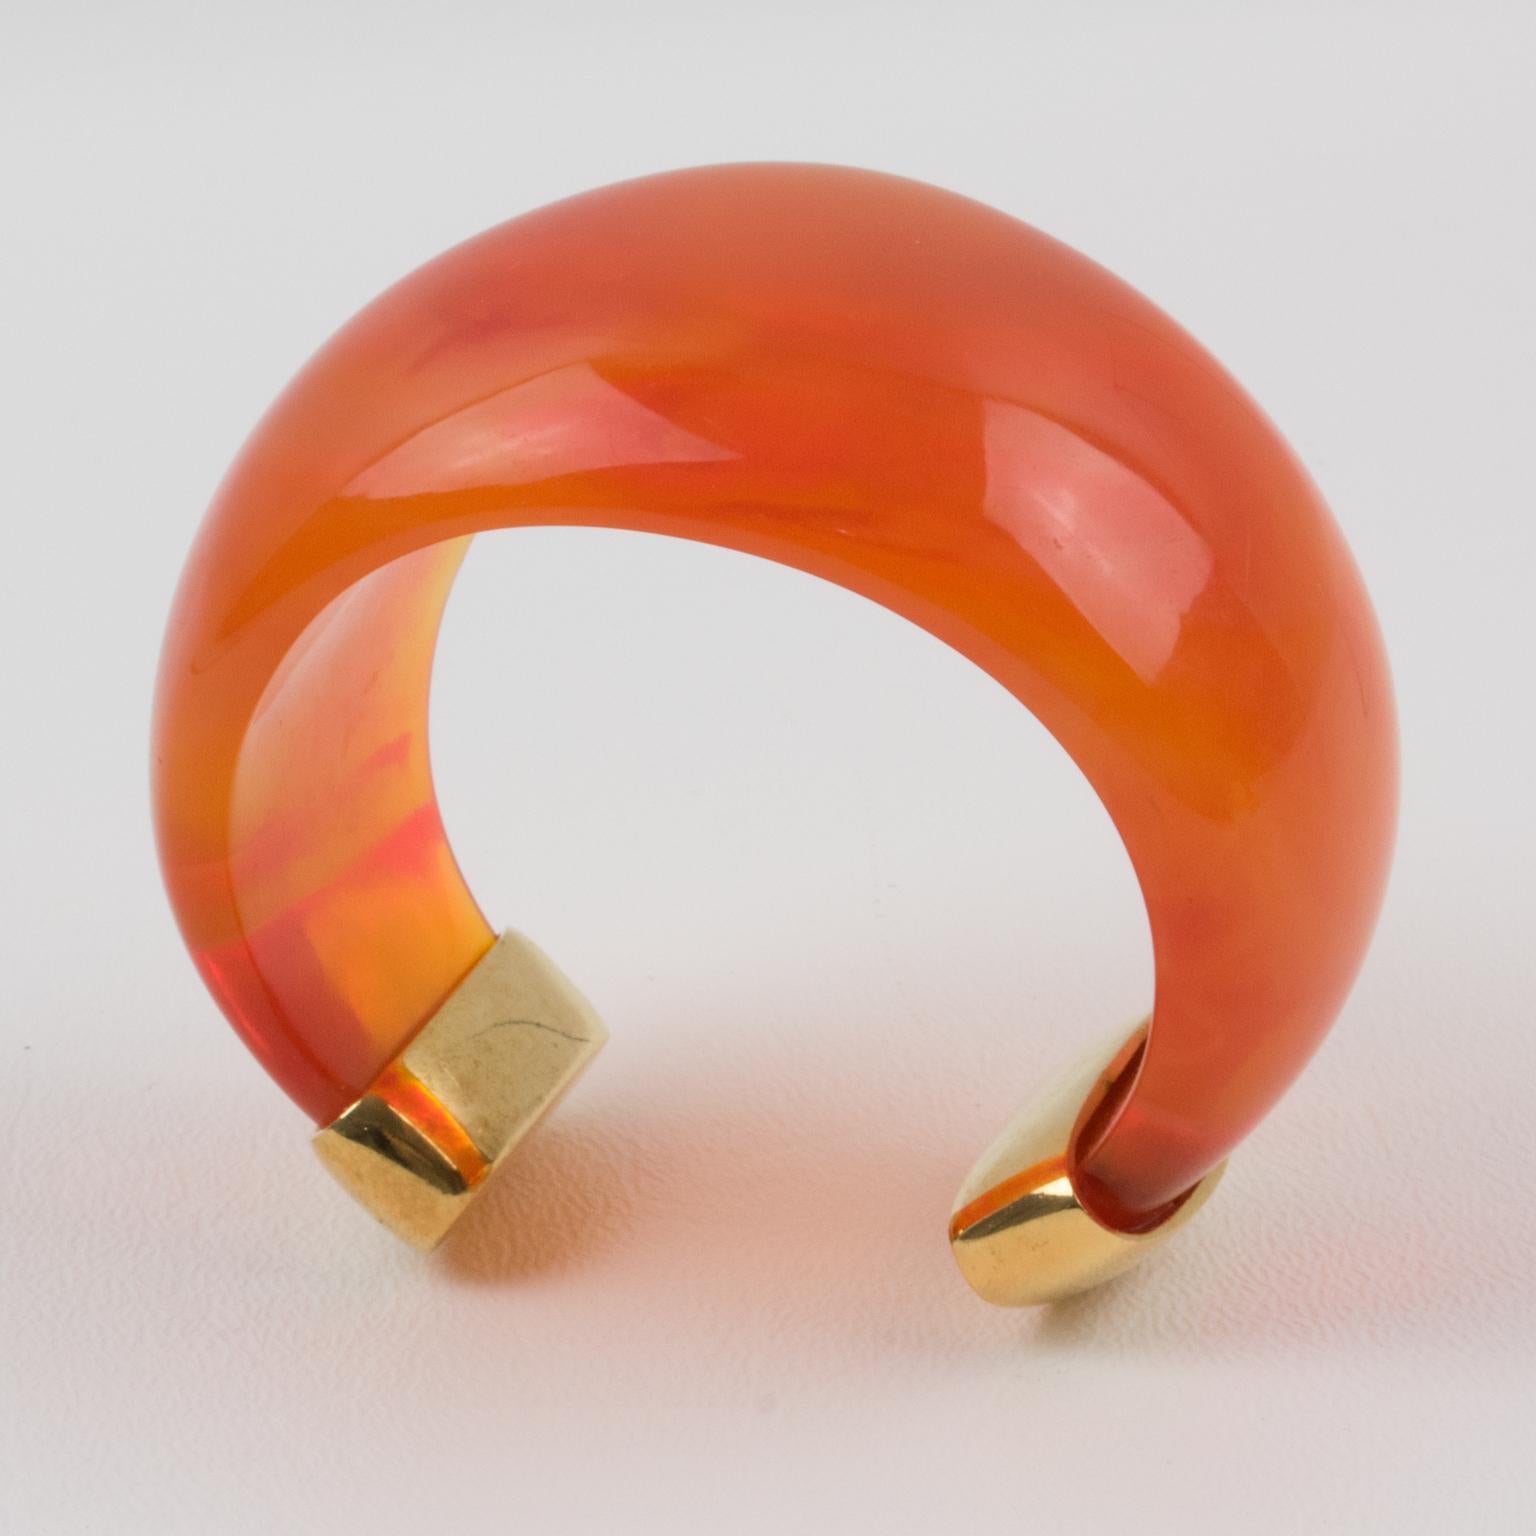 Exquisite Yves Saint Laurent YSL Paris cuff bracelet. Massive resin bracelet, featuring a heavily domed cuff in translucent bright orange marbled resin finished with gilt metal hardware. Engraved marking 